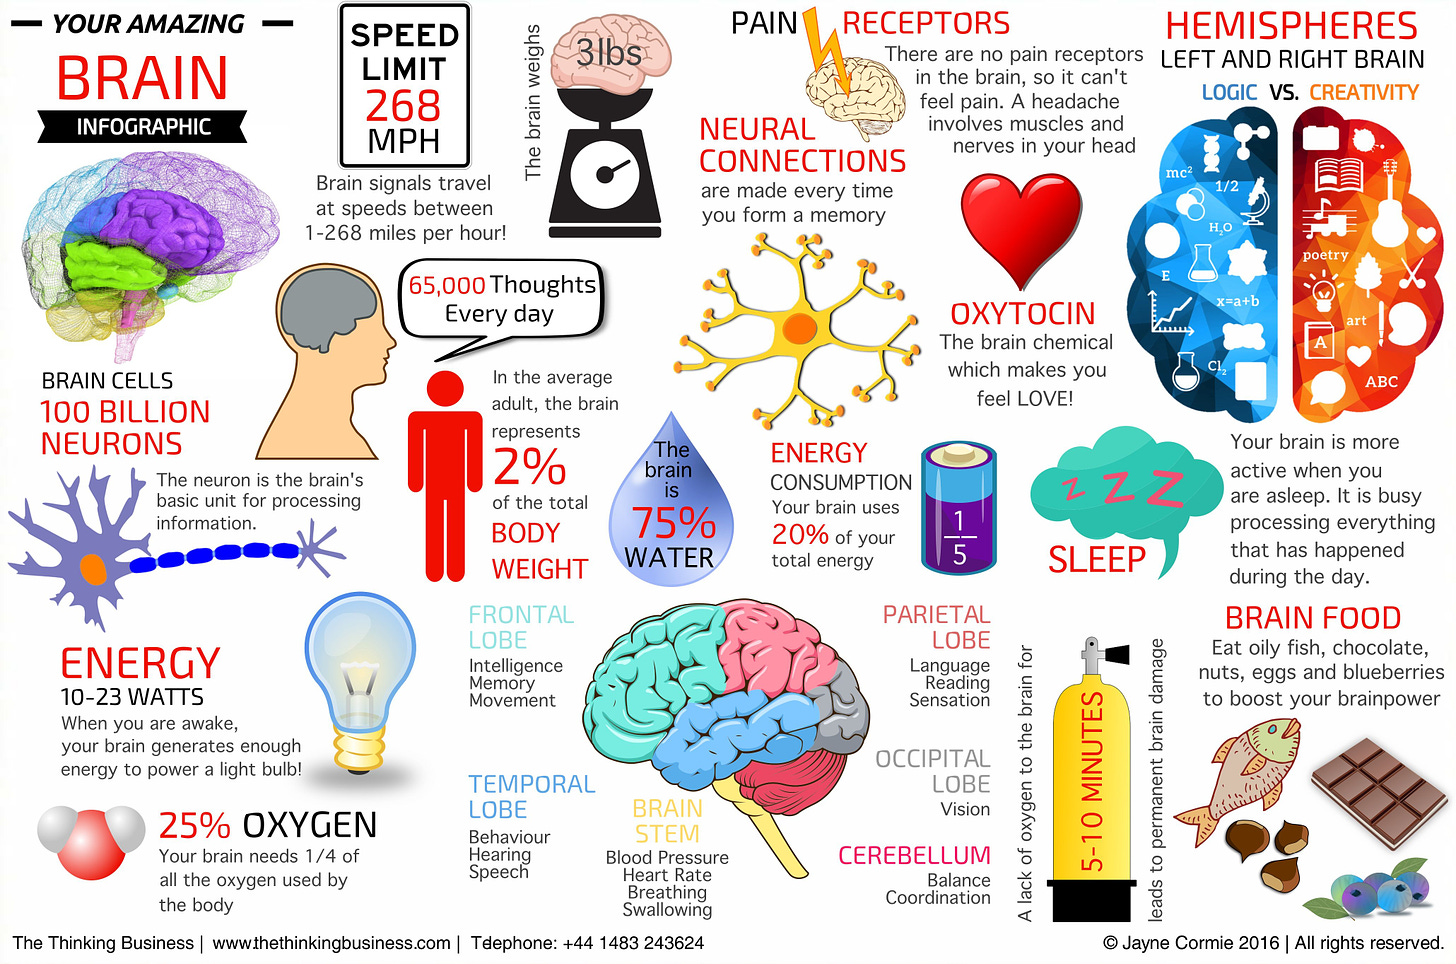 Your Amazing Brain Infographic | The Thinking Business